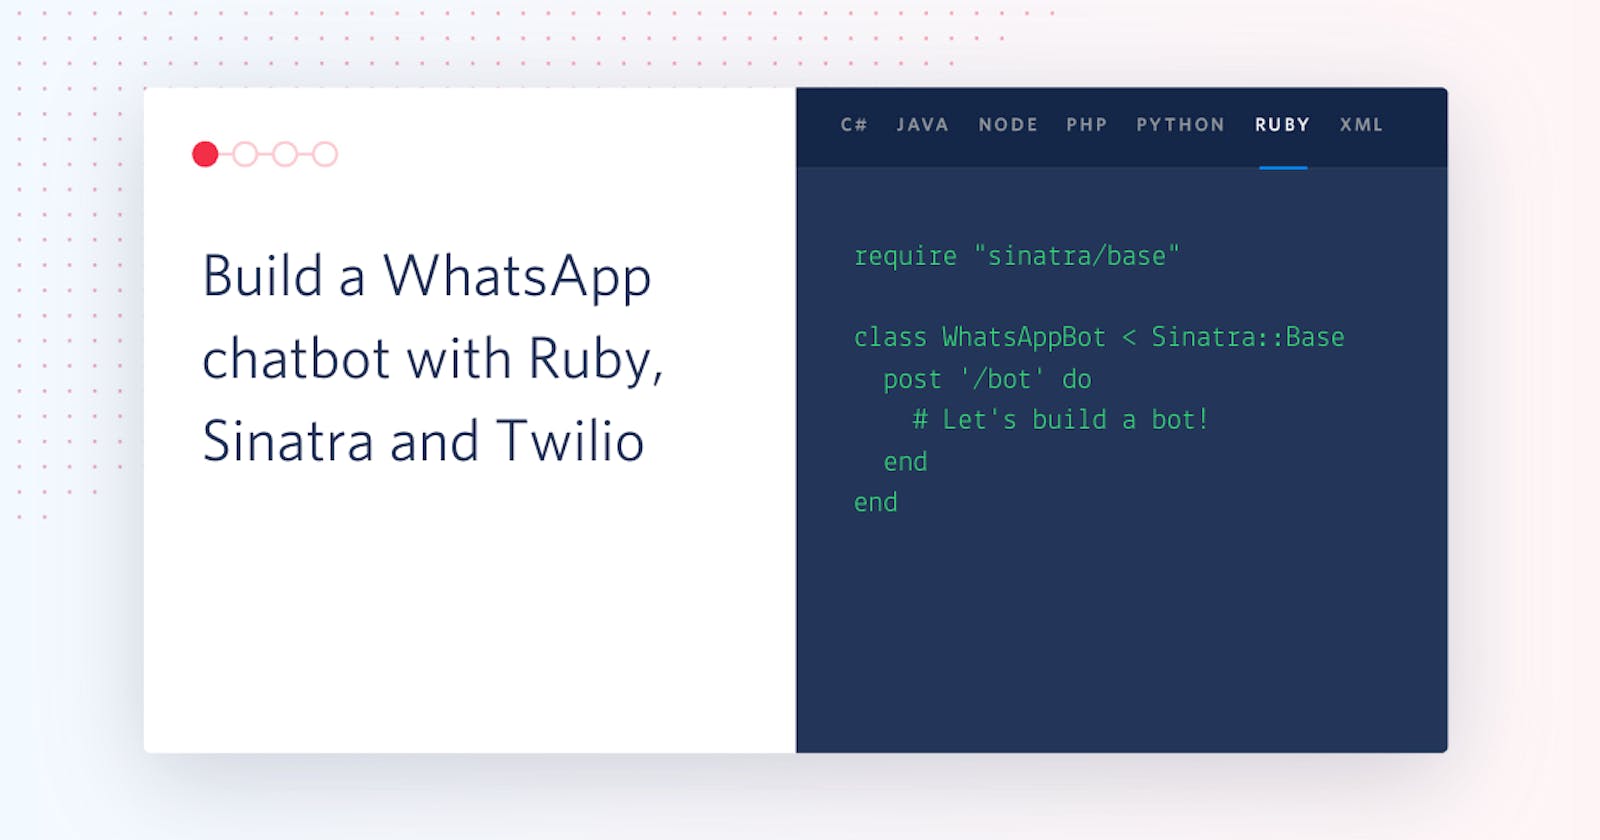 Build a WhatsApp chatbot with Ruby, Sinatra and Twilio